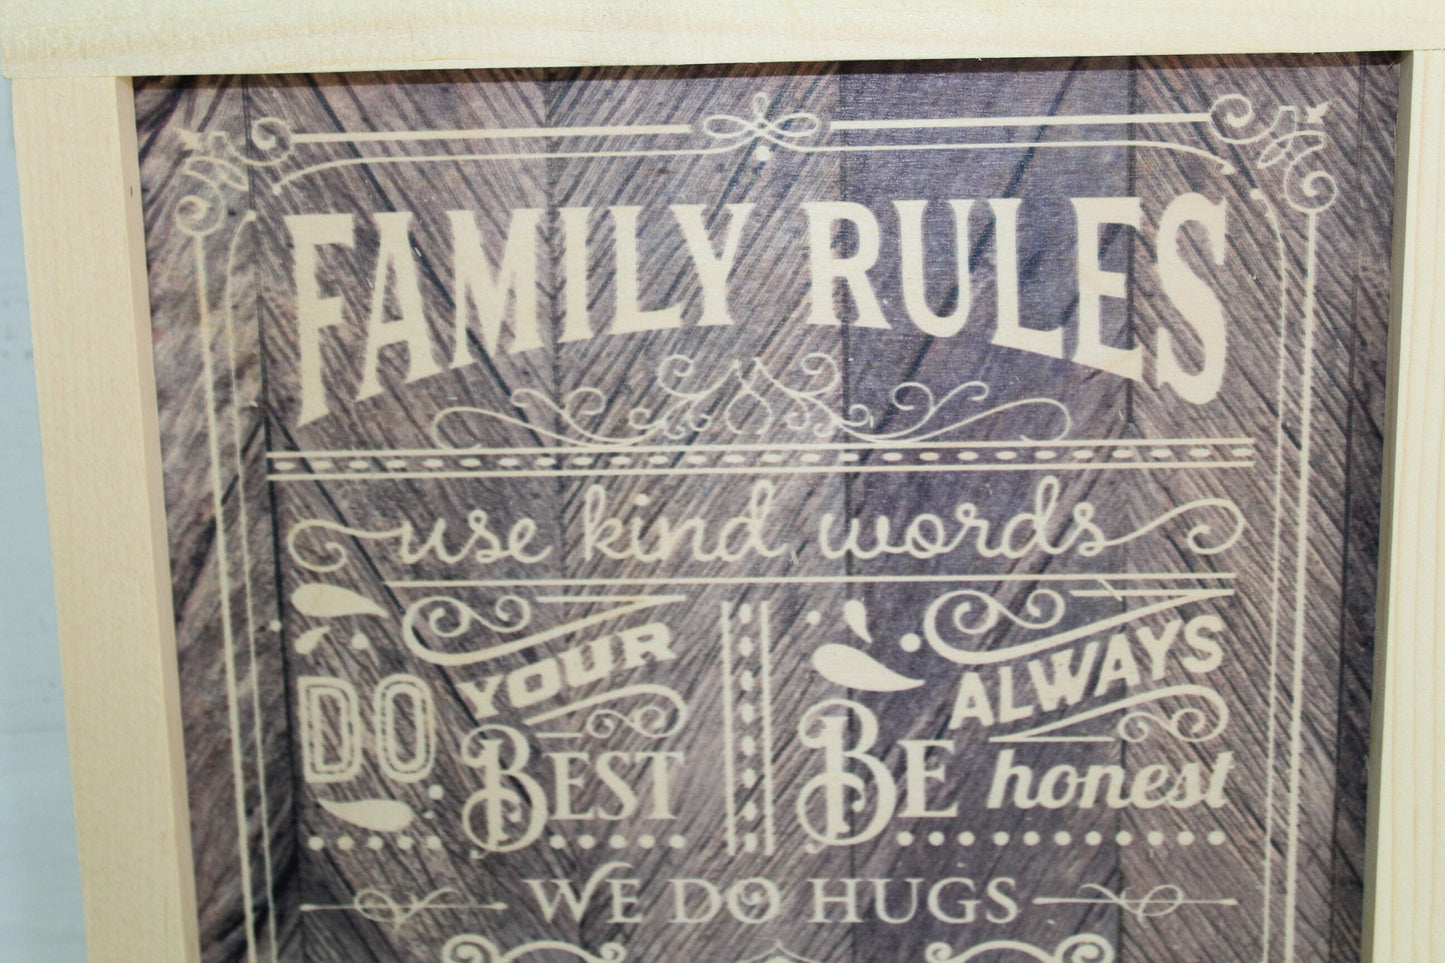 Family Rules Wood Sign Primitive Do Your Best Forgive Forget Love One Another Wall Hanging Decoration Decor Rustic Happy Positive